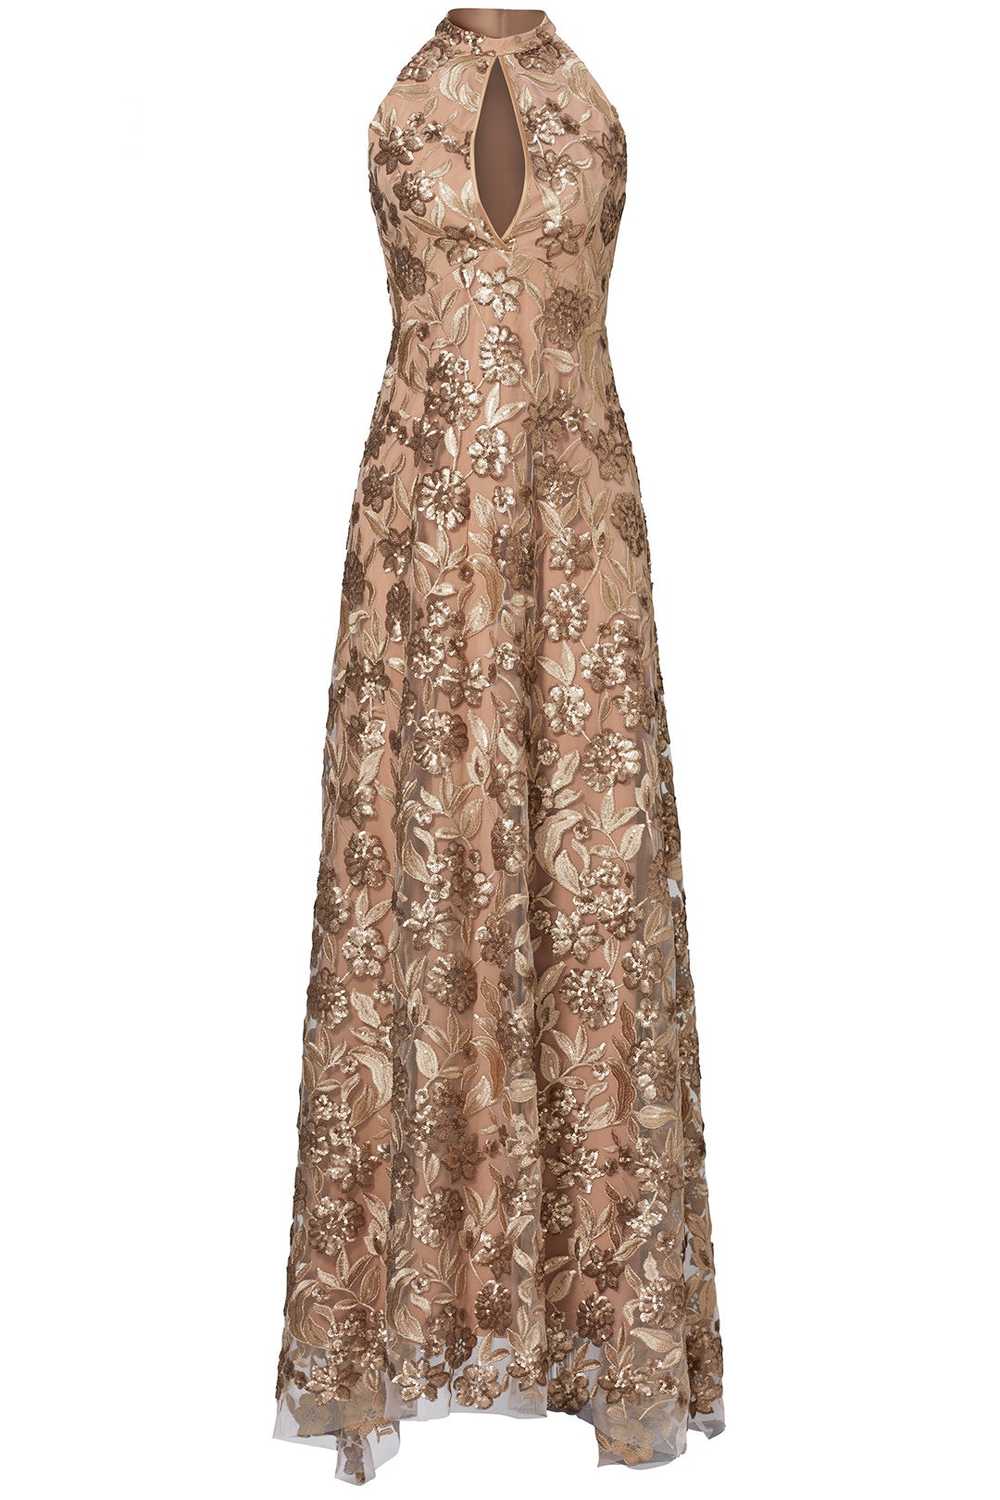 ERIN erin fetherston Gold Joan Gown - image 4